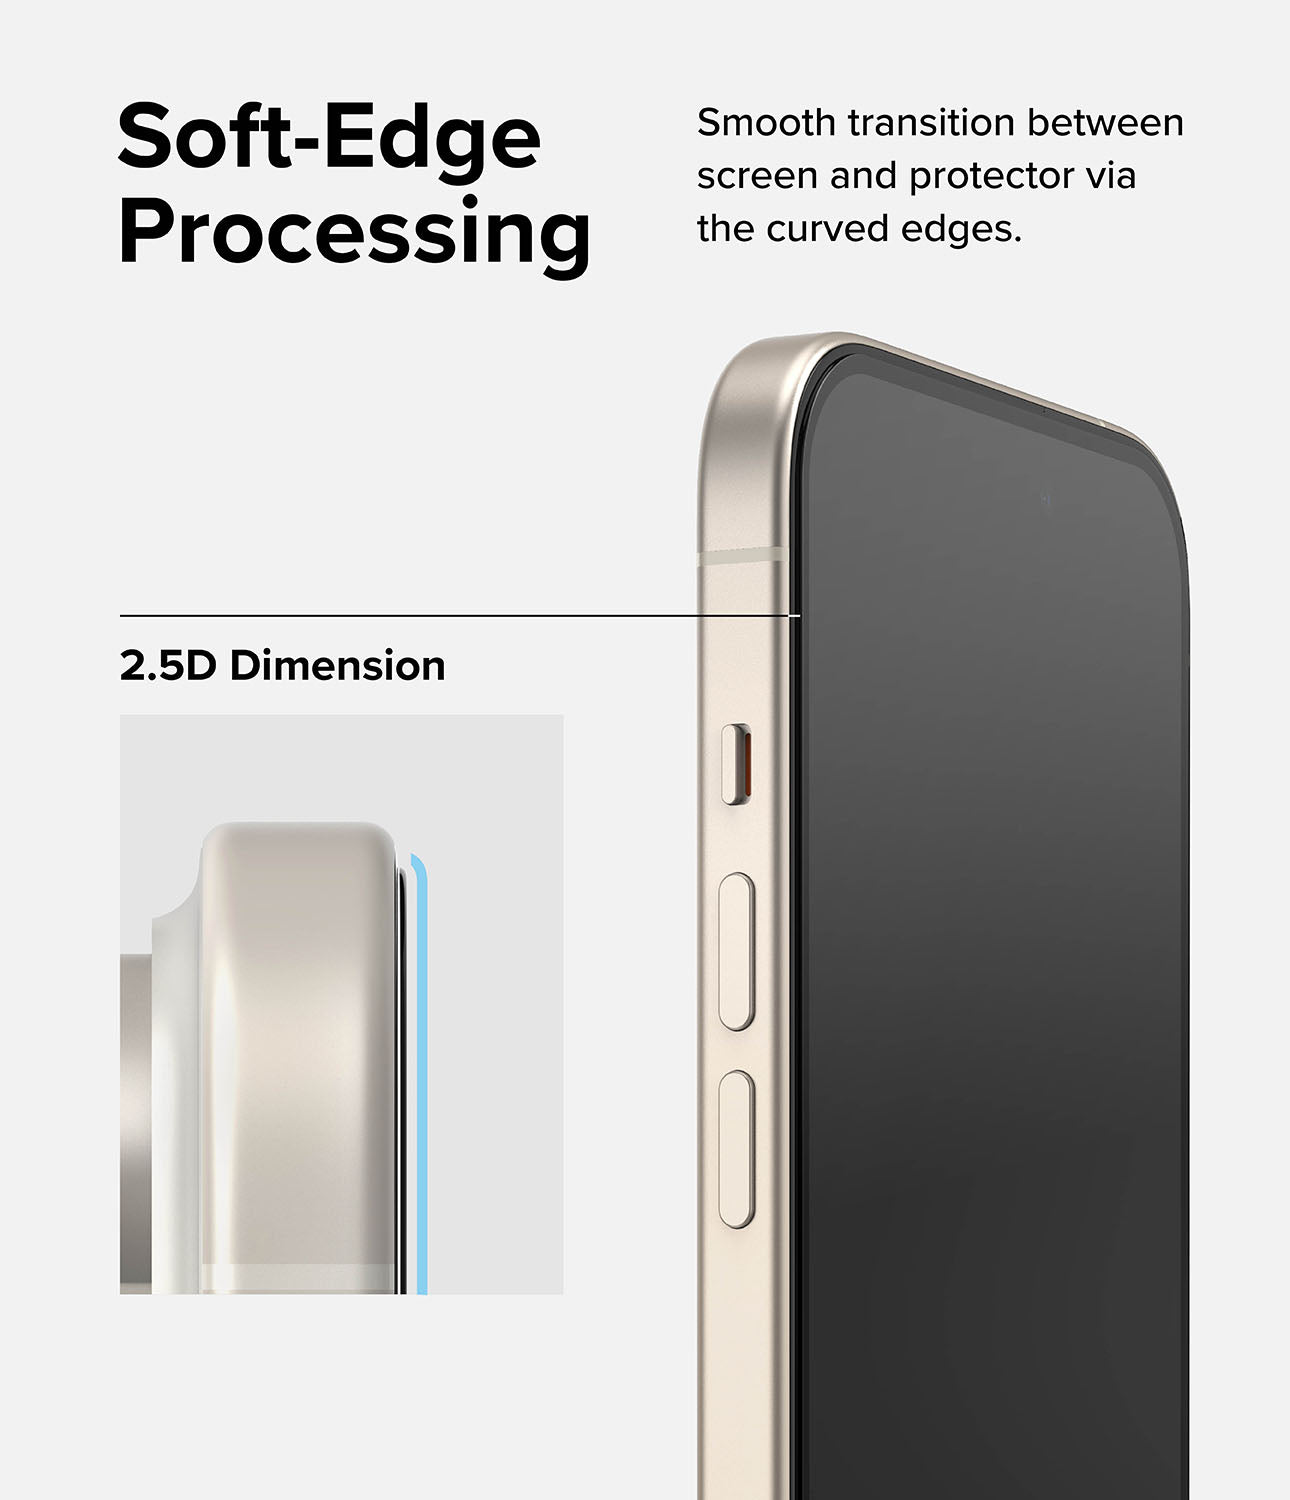 iPhone 15 Screen Protector | Full Cover Glass Premium edge-to-edge 9H hardness tempered glass protector